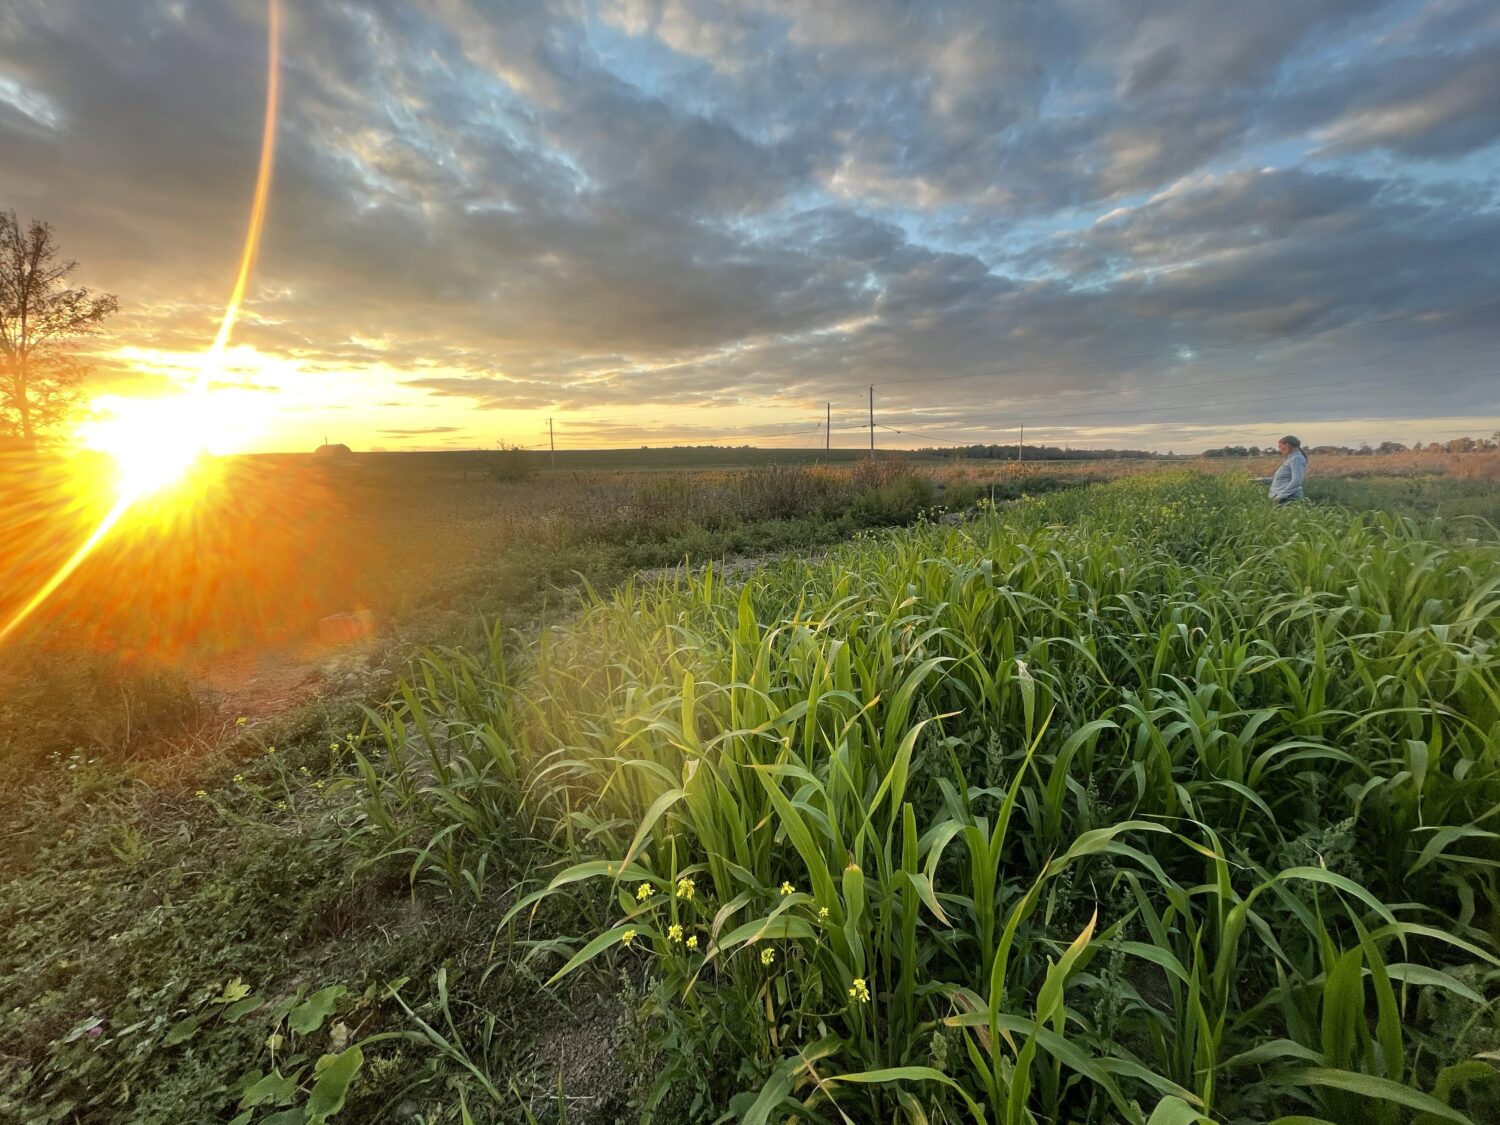 dramatic lens flare - Summer Sunsets, Fall Harvest